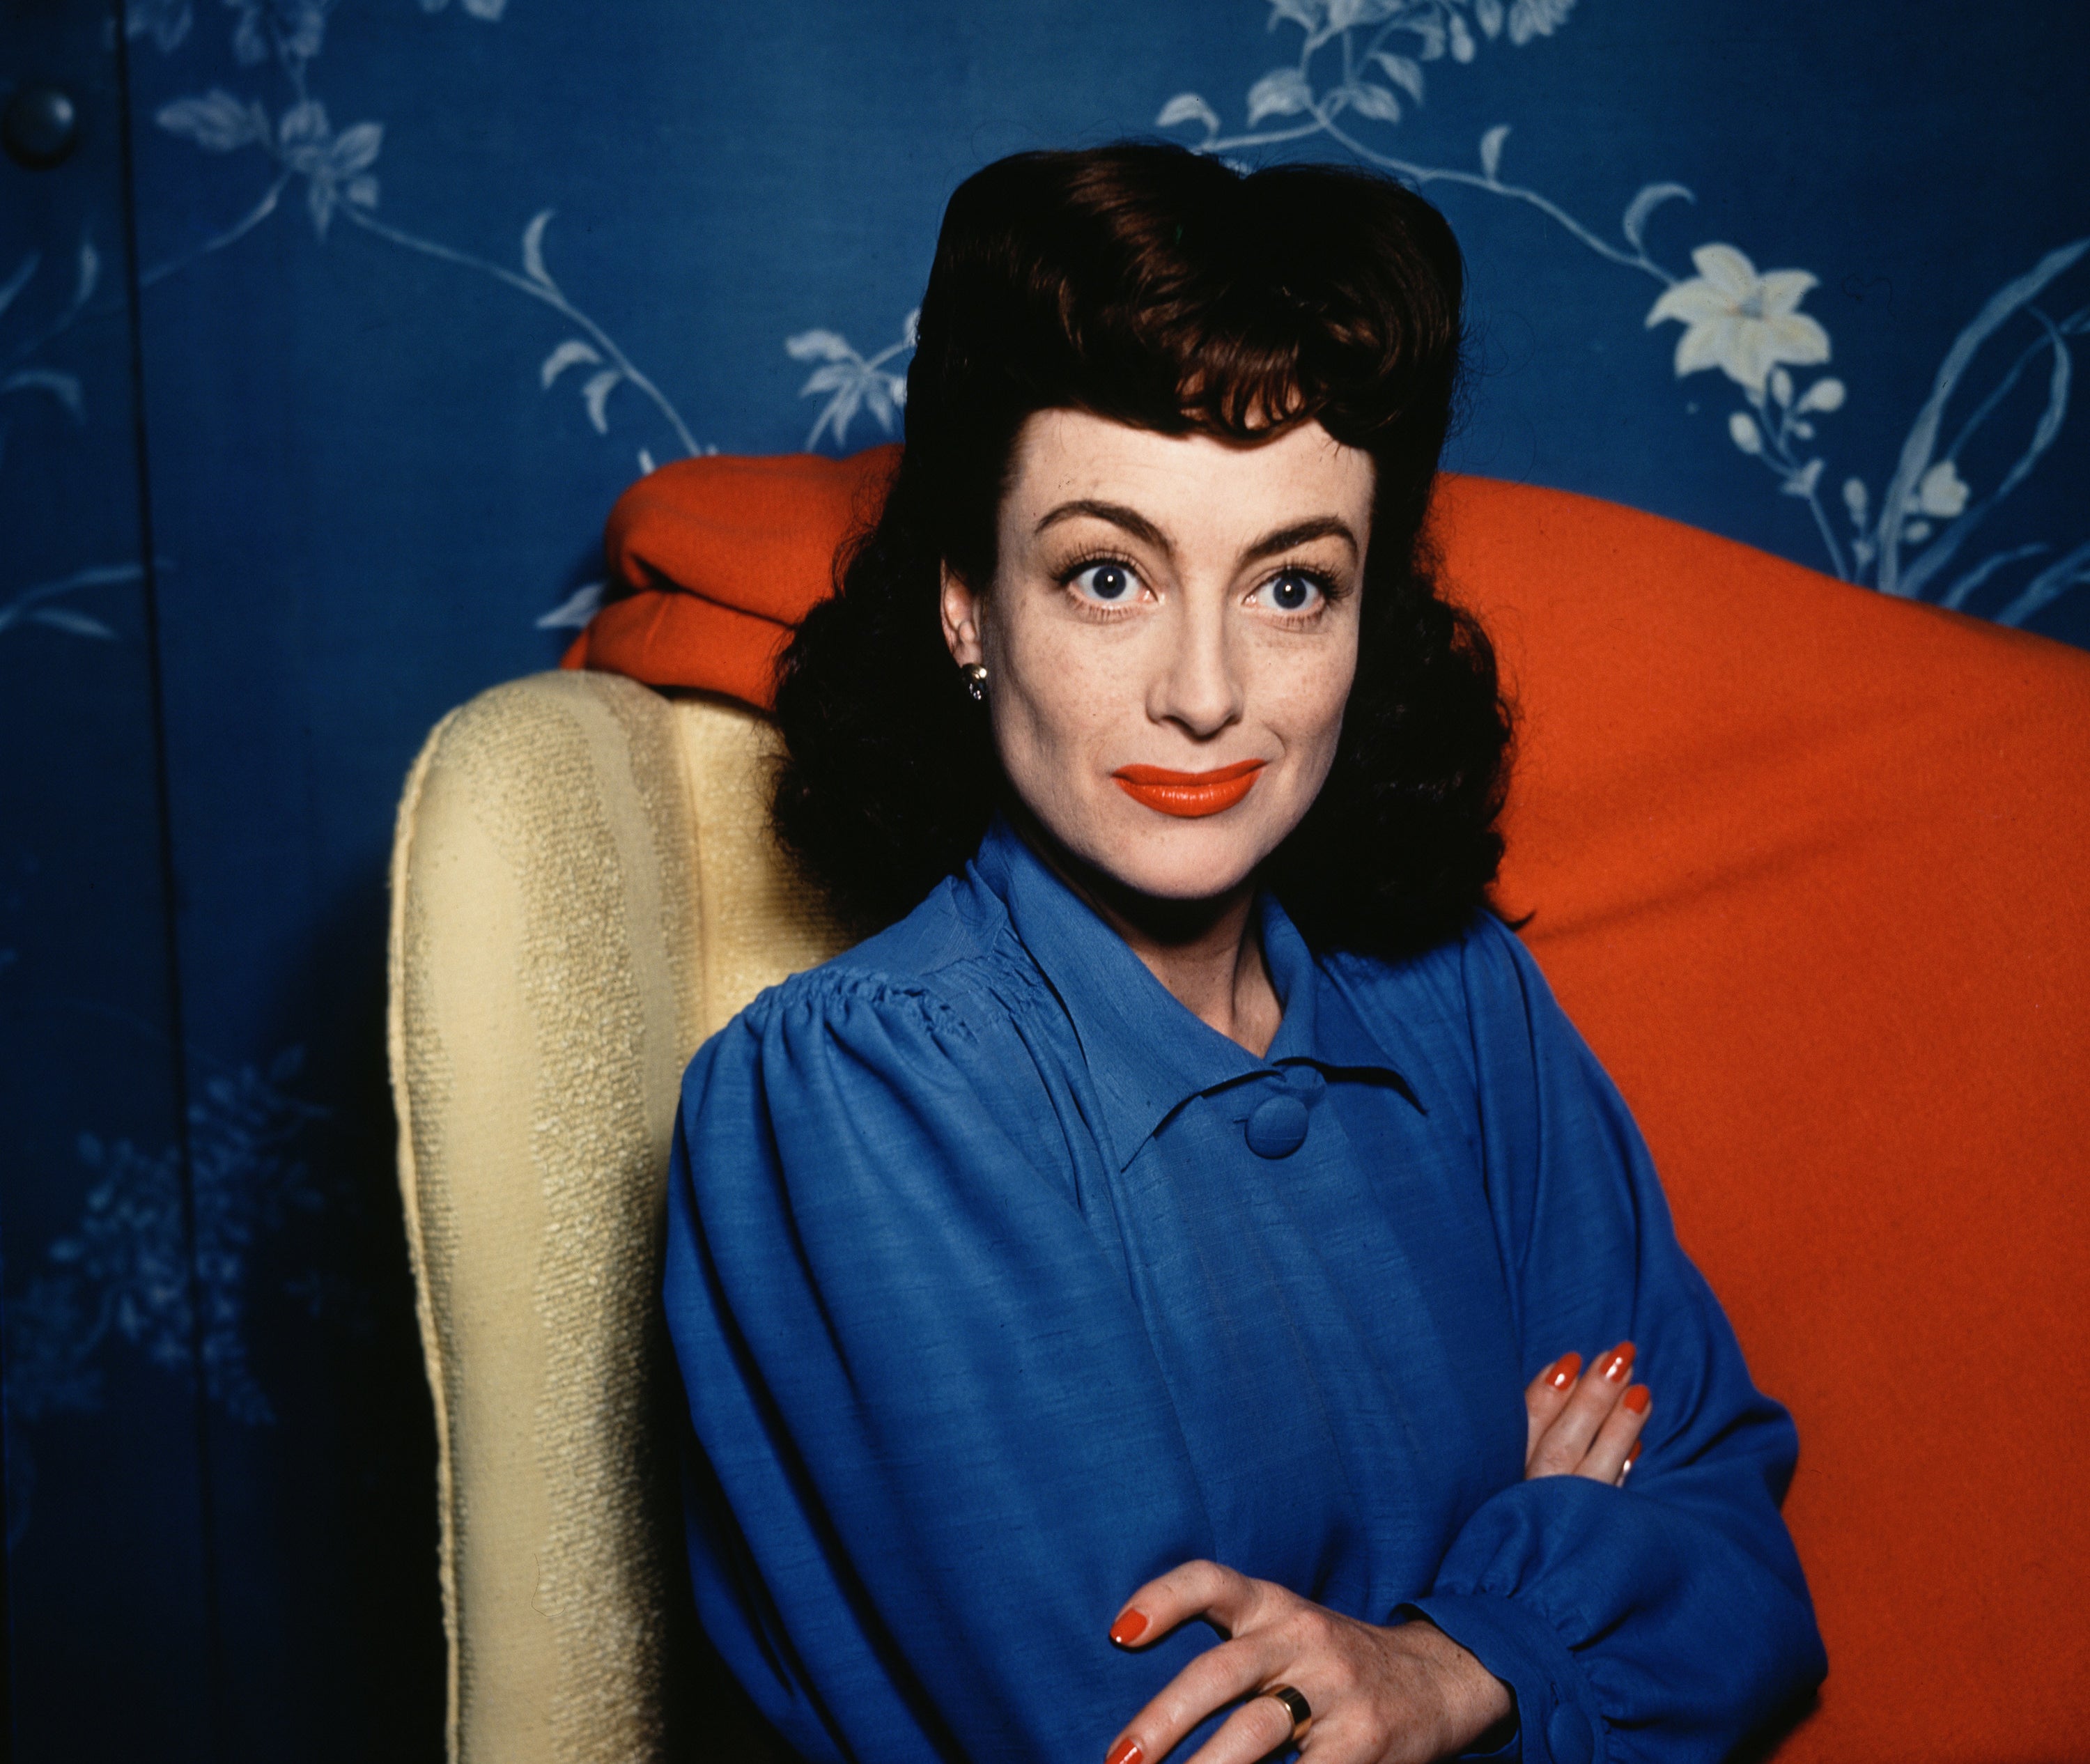 A color photo of Joan Crawford from the 1940s of her sitting an gold armchair with her arms crossed, eyebrows arched, and slightly smiling, while wearing a blue blouse